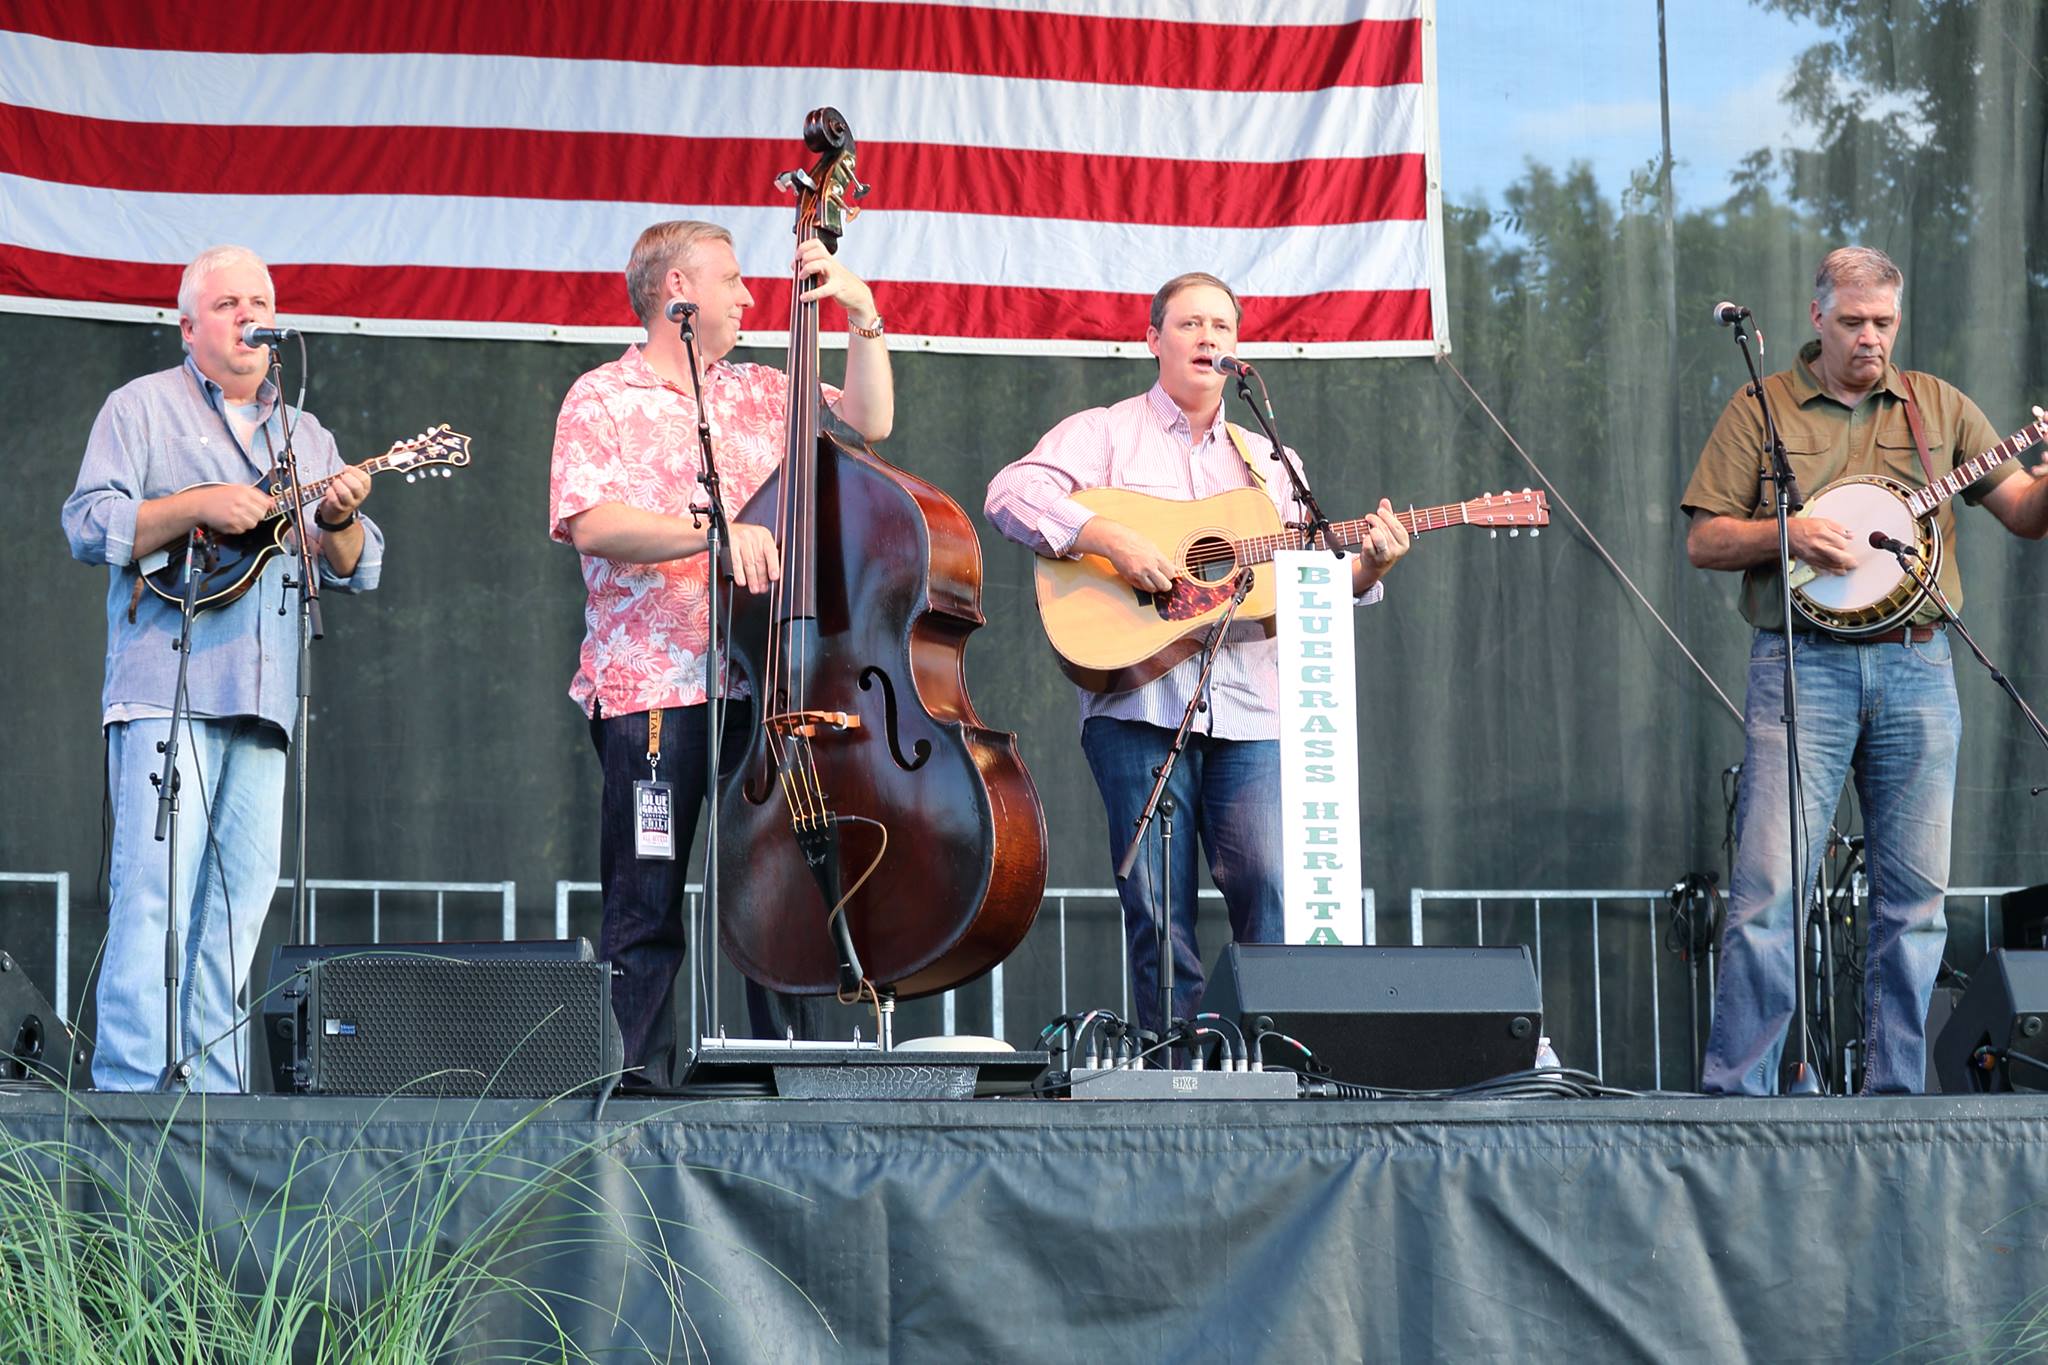 Texas & Tennessee at Bloomin' Bluegrass 2016, by Nate Dalzell]